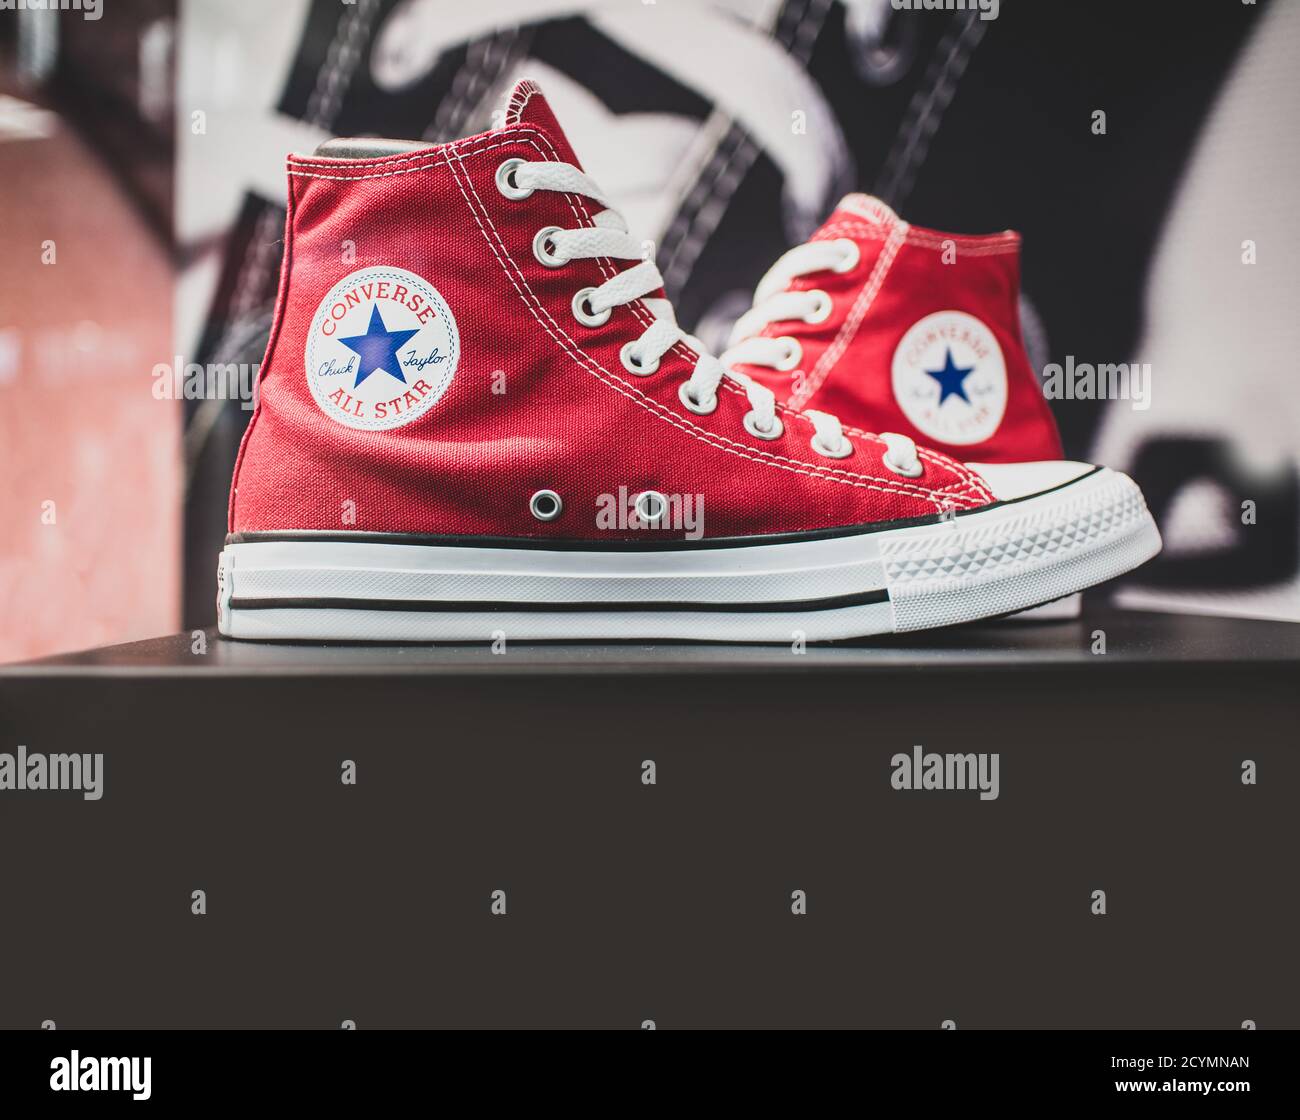 Converse shoes on display. They are an American shoe company that designs and produces sneakers that are cool, grungy with the youth culture Stock Photo - Alamy